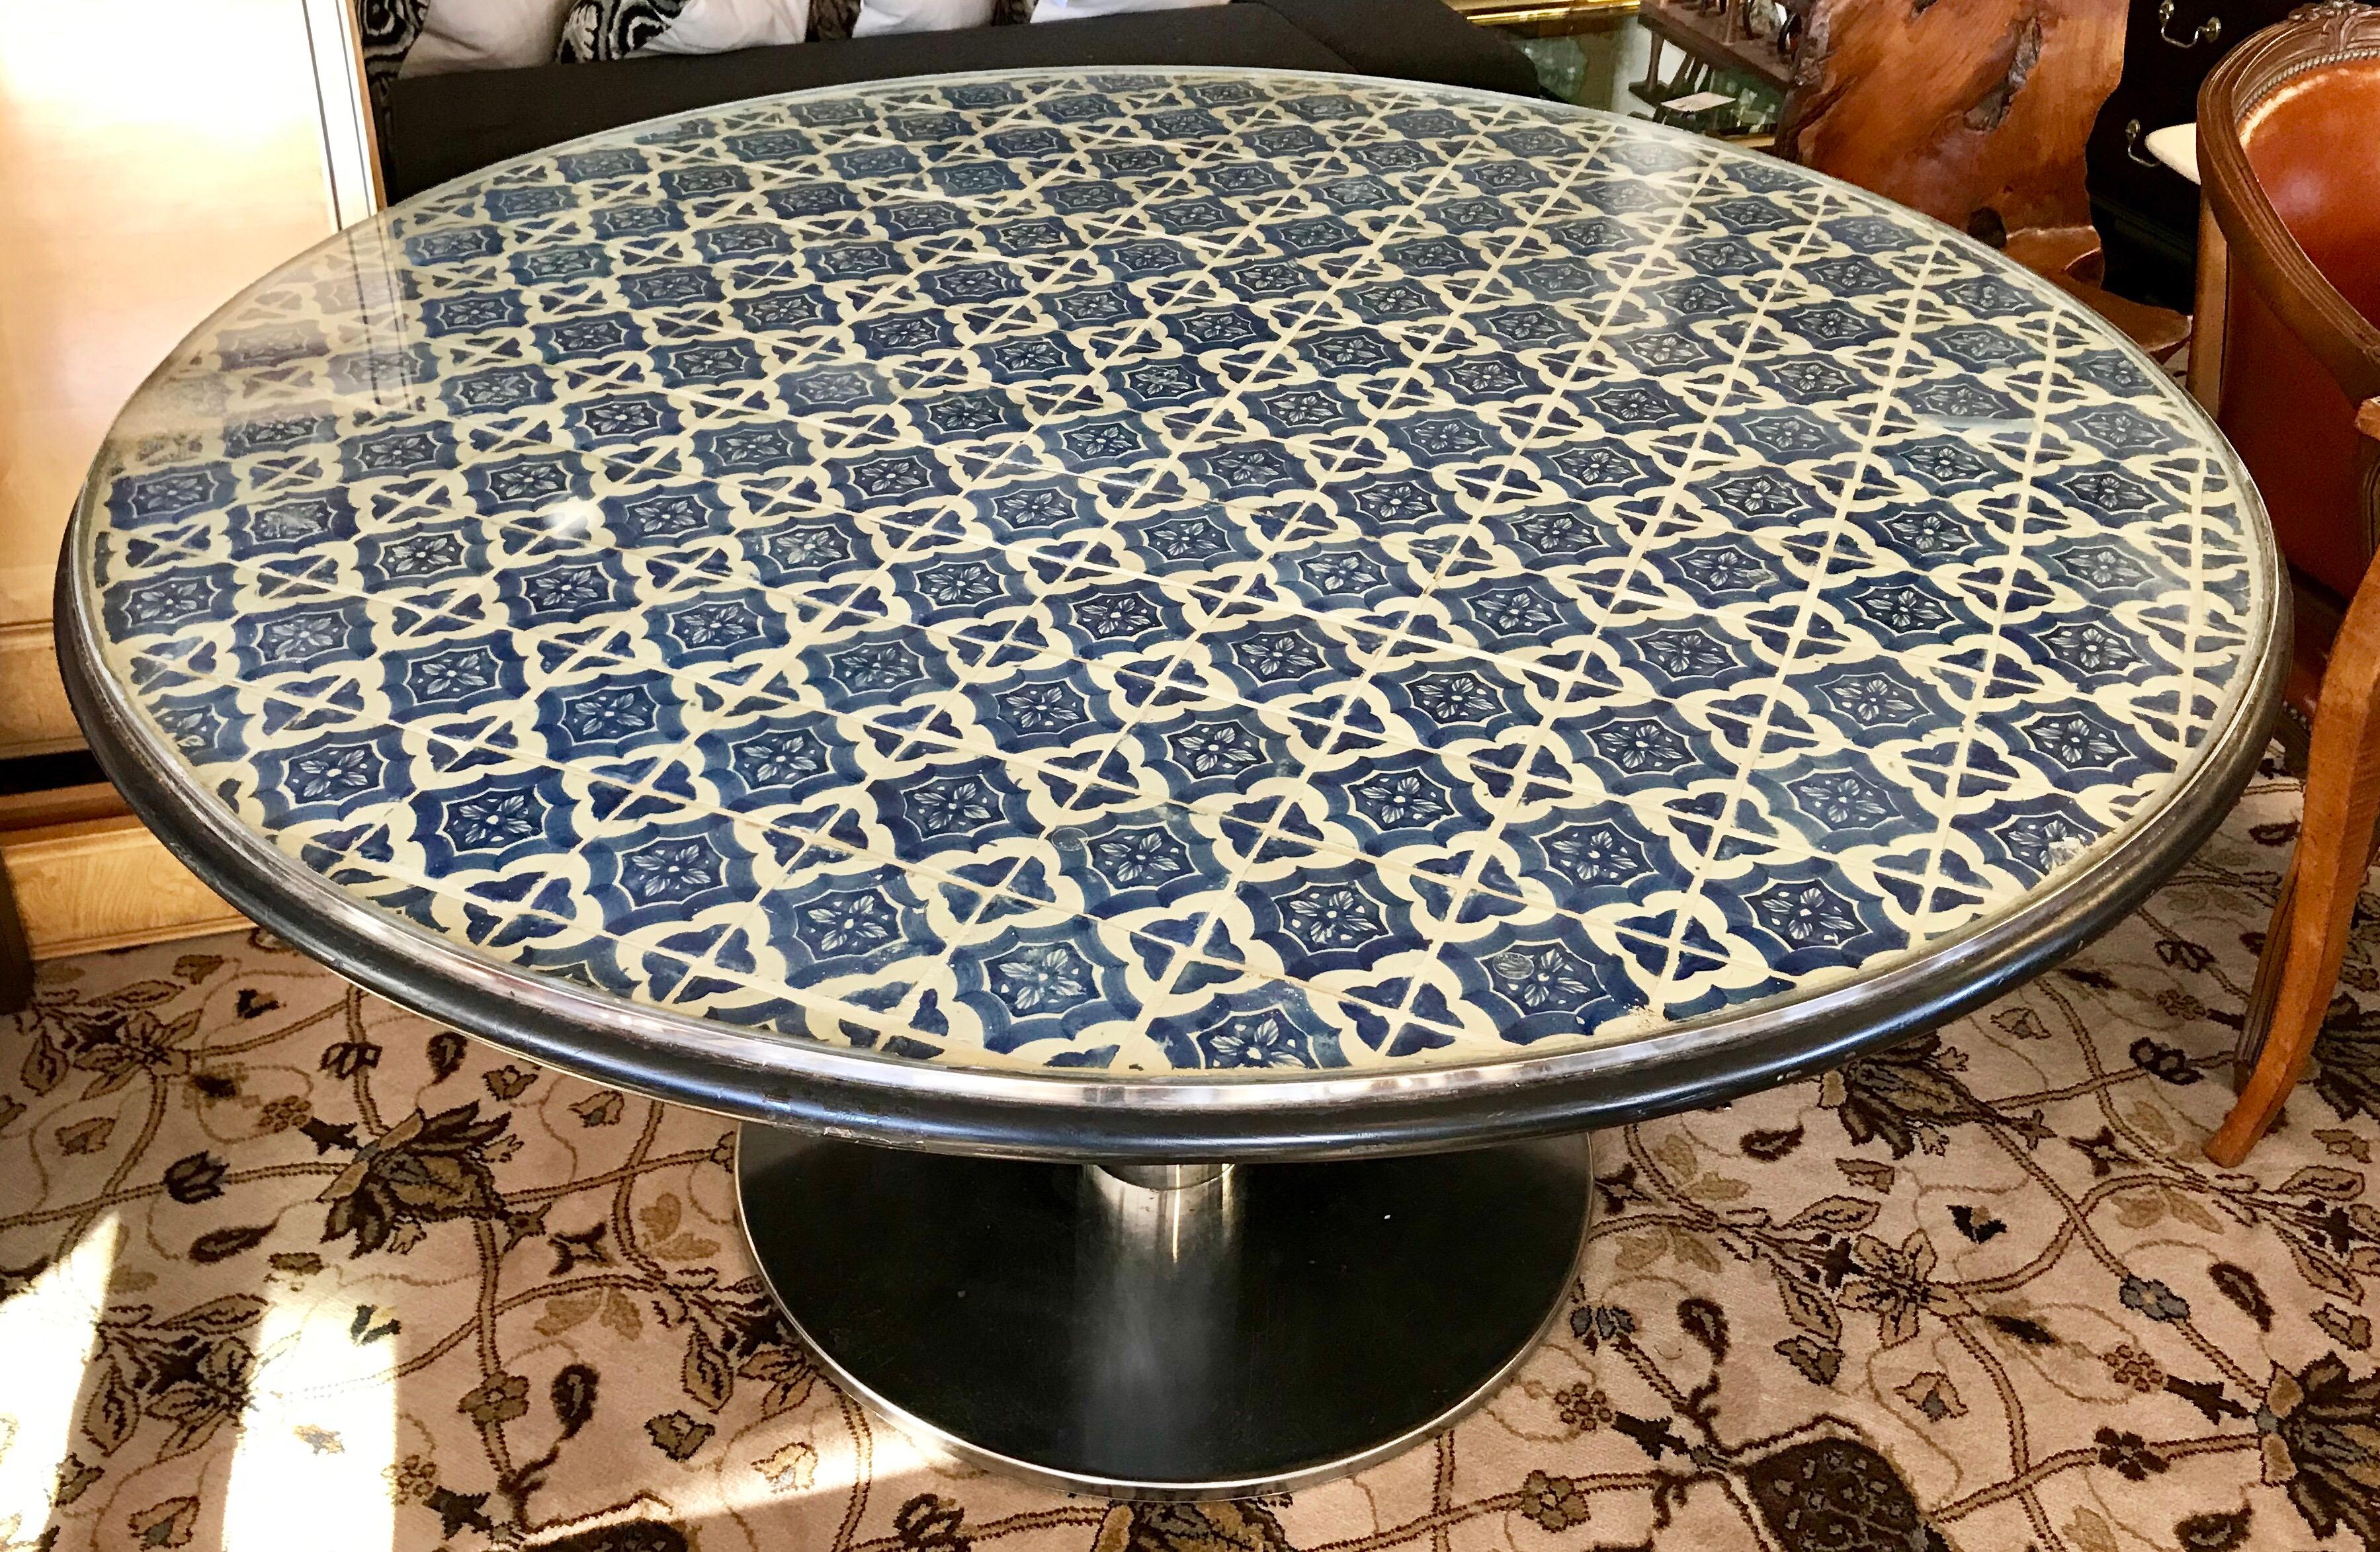 Magnificent custom round tile top table on a stainless steel pedestal base. Top is made of hand painted blue and white Spanish tiles and is protected with a glass top. Tiles are fitted inside a steel frame and the edge of table is a black painted